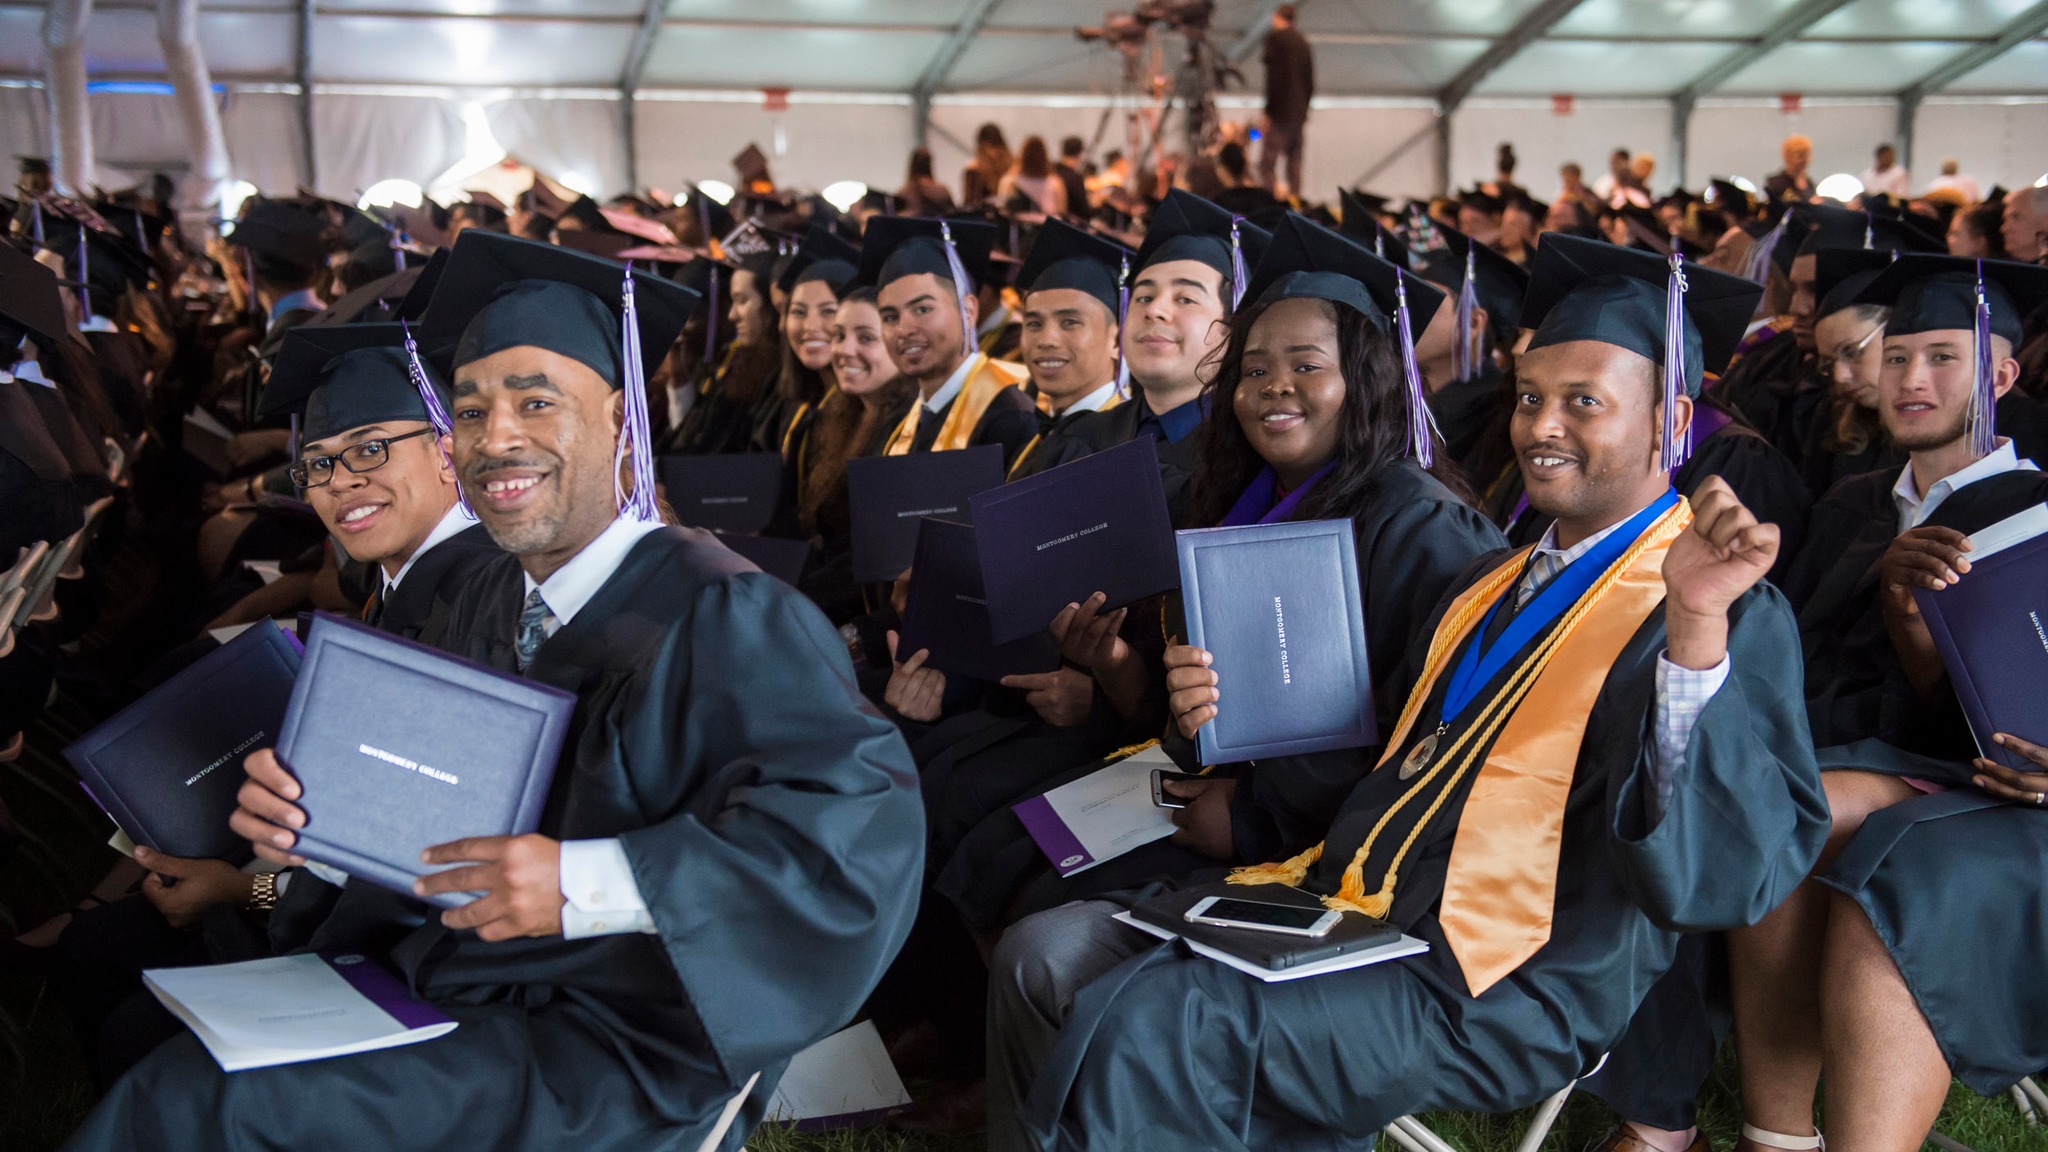 Montgomery College to Hold 77th Annual Commencement Exercises [Video]